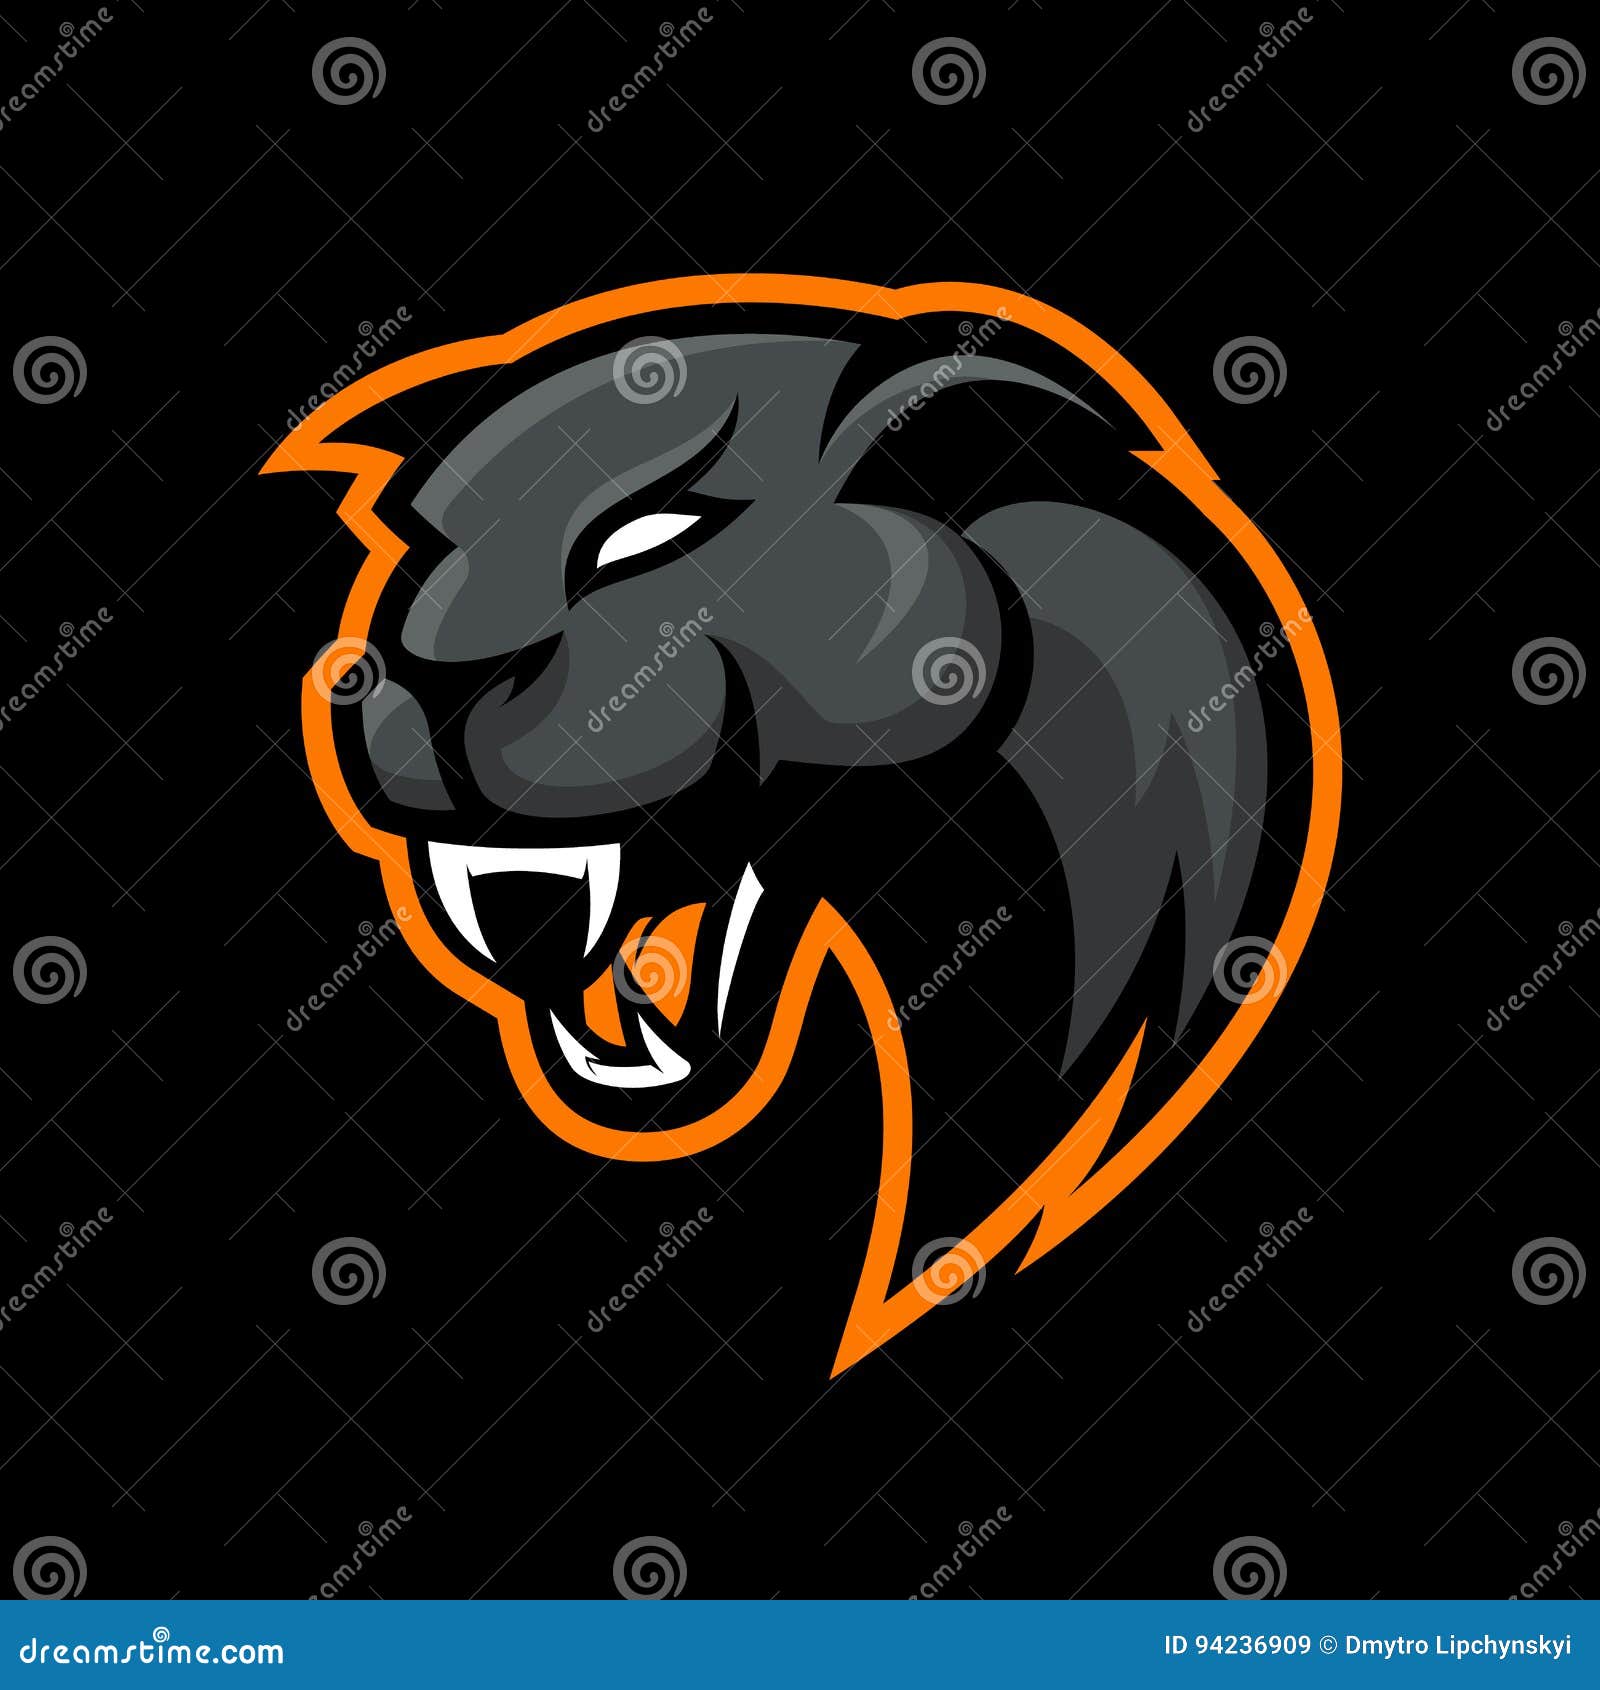 furious panther sport  logo concept on black background. modern professional mascot team badge .